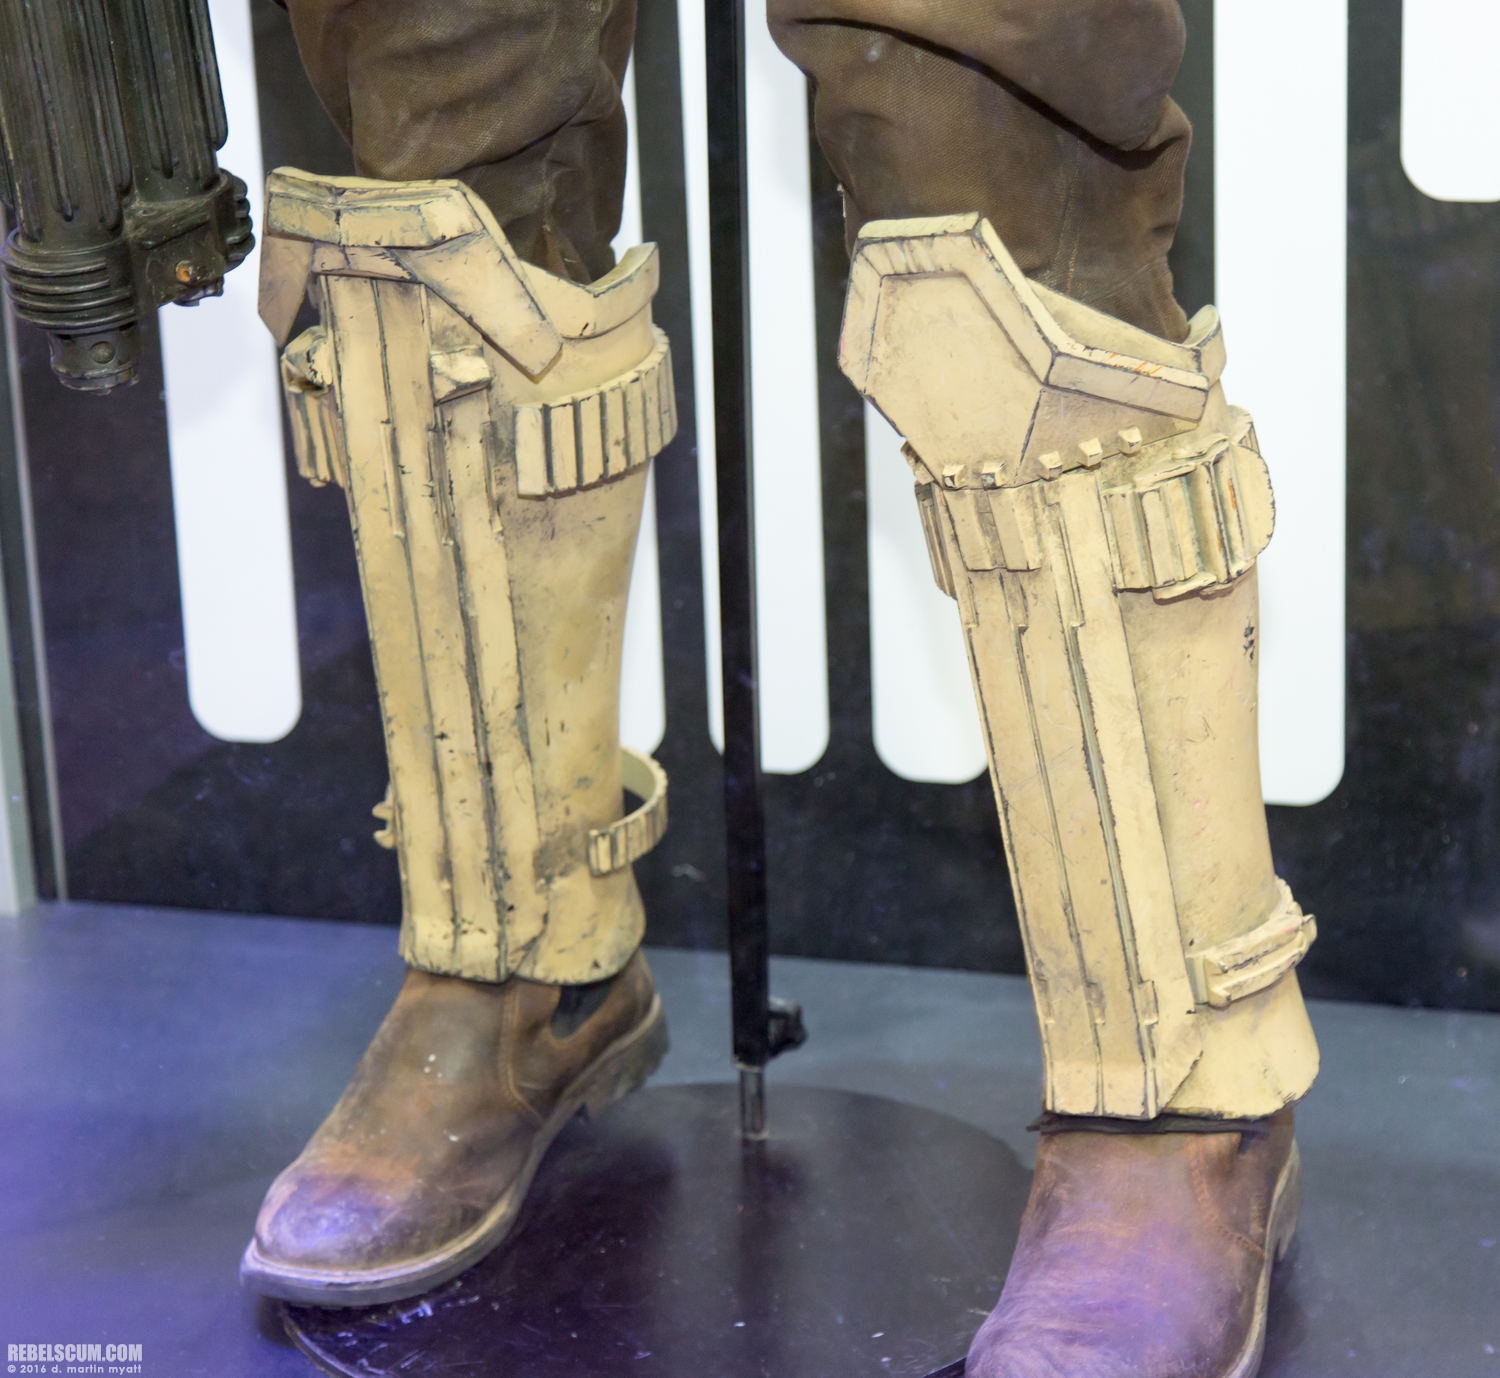 2016-SDCC-Rogue-One-costumes-047.jpg